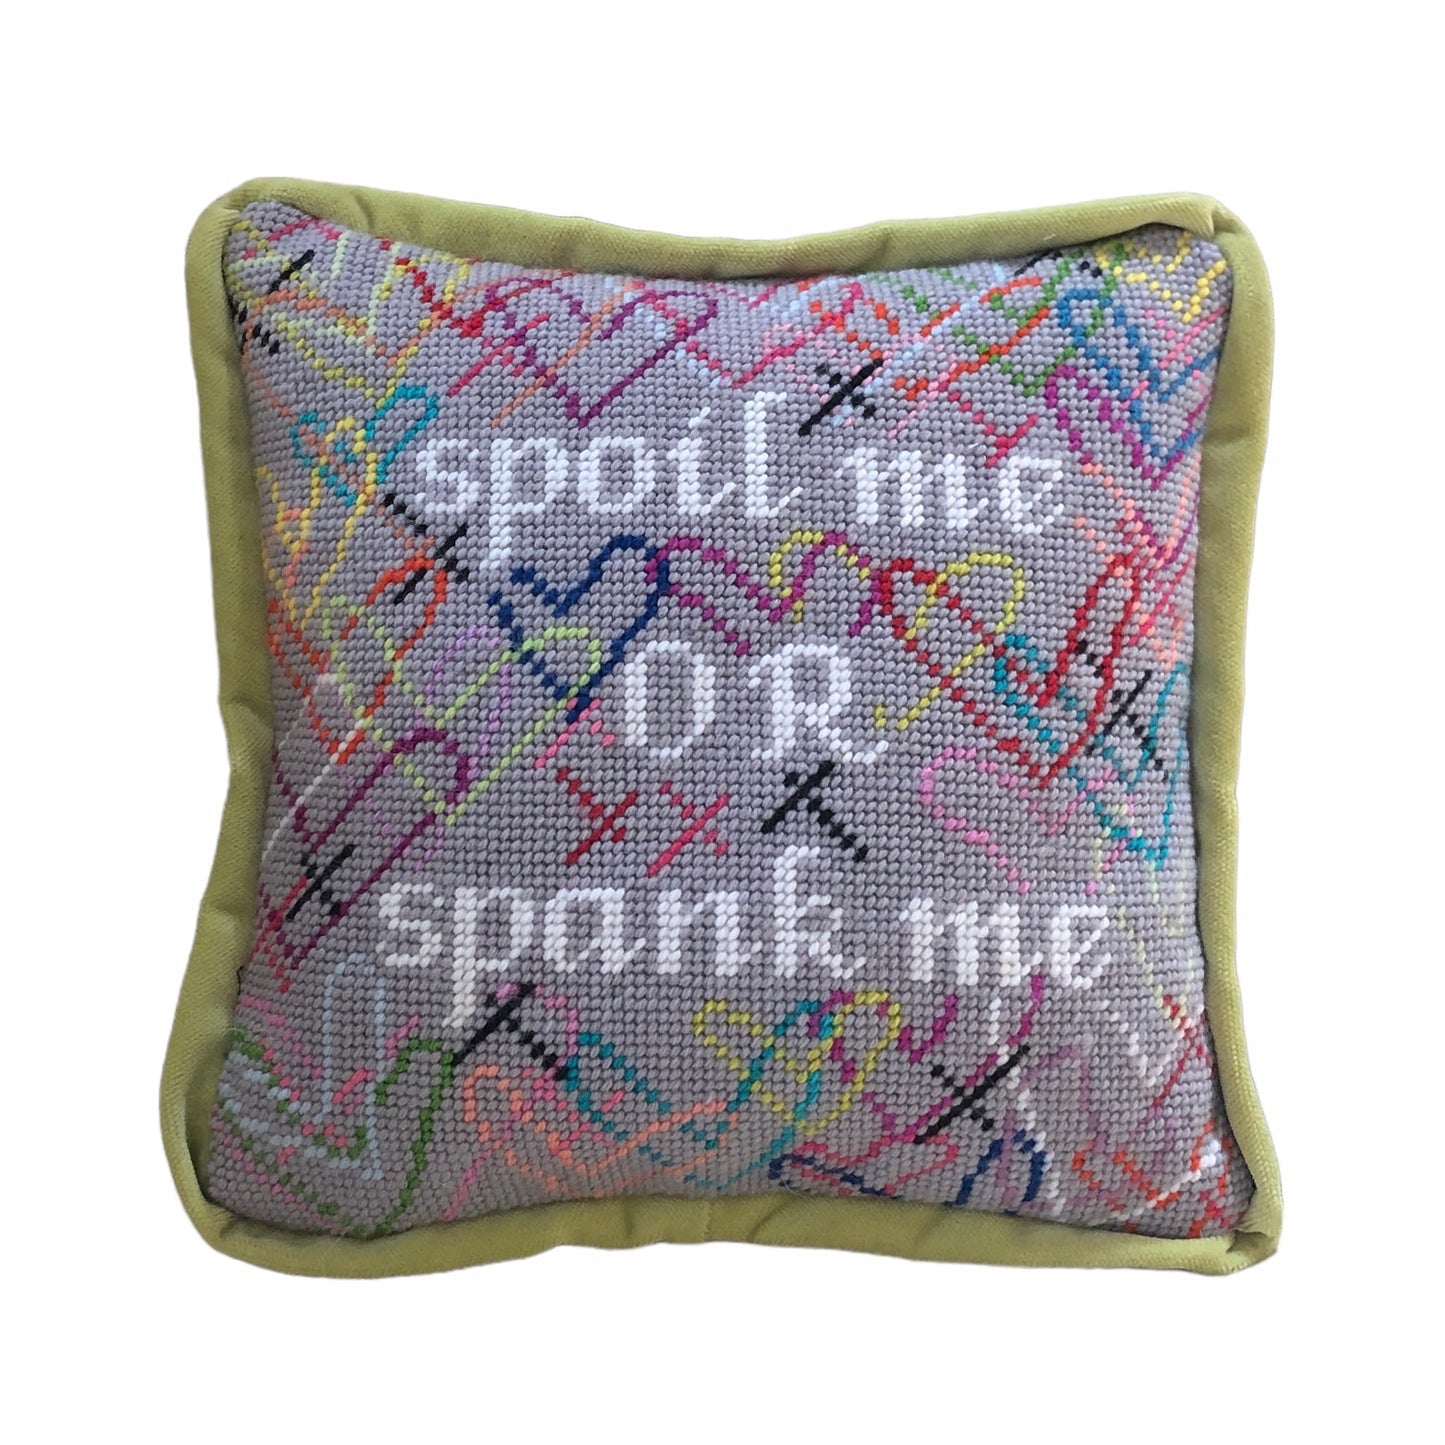 needlepoint SPOIL ME OR SPANK ME in white, surrounded by brightly colored hearts and a soft gray background